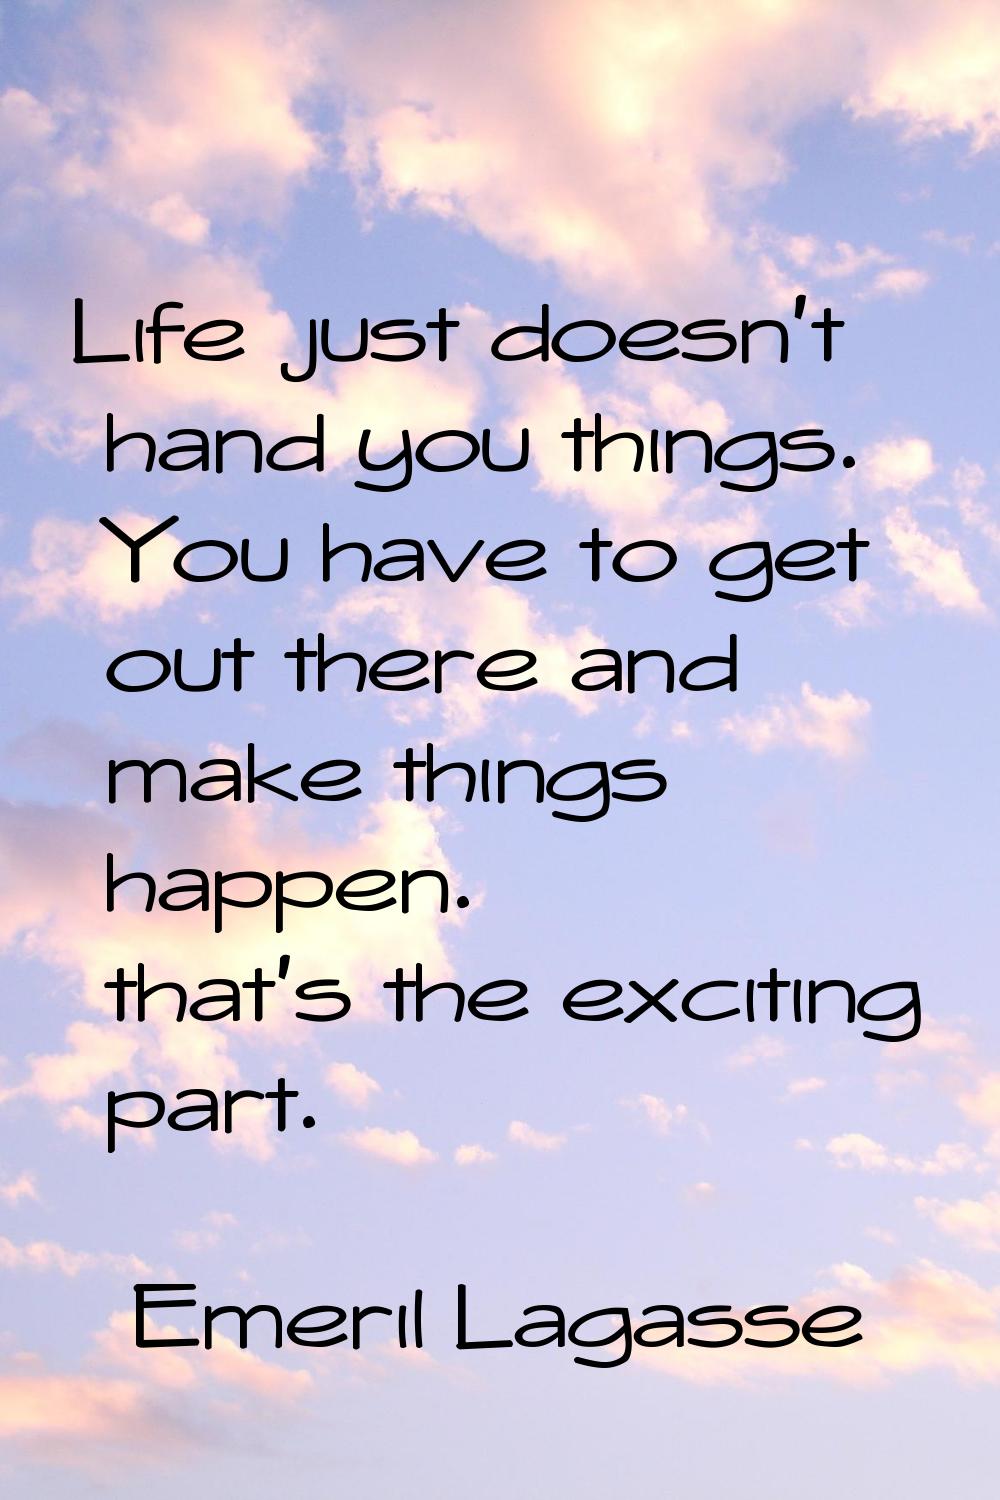 Life just doesn't hand you things. You have to get out there and make things happen. that's the exc